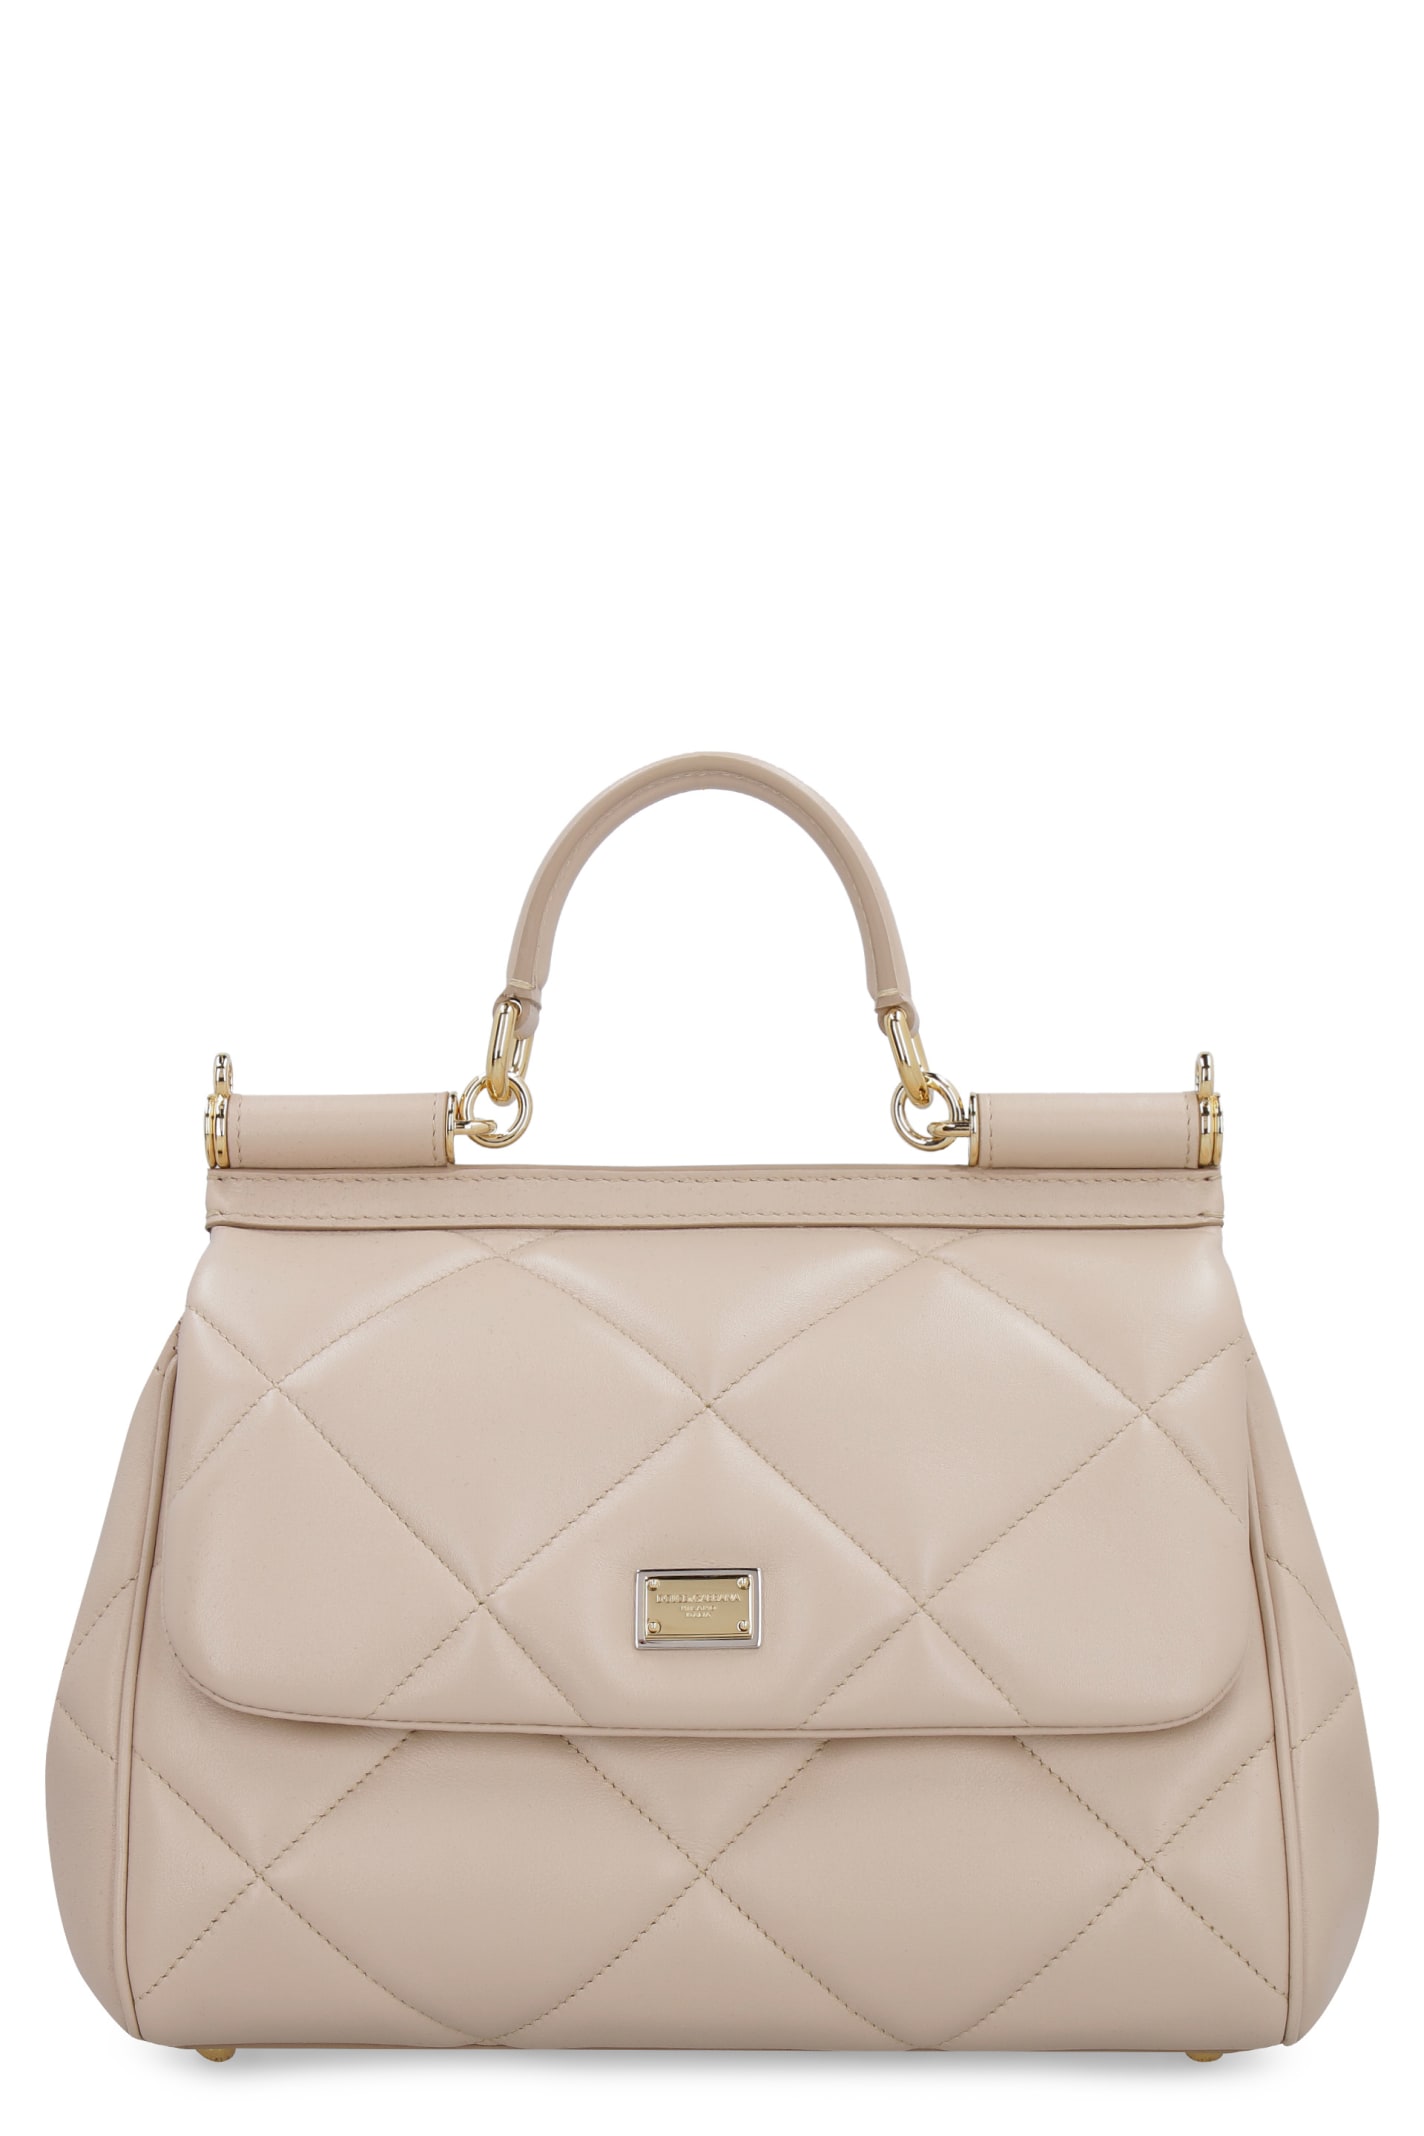 Dolce & Gabbana Sicily Quilted Leather Bag